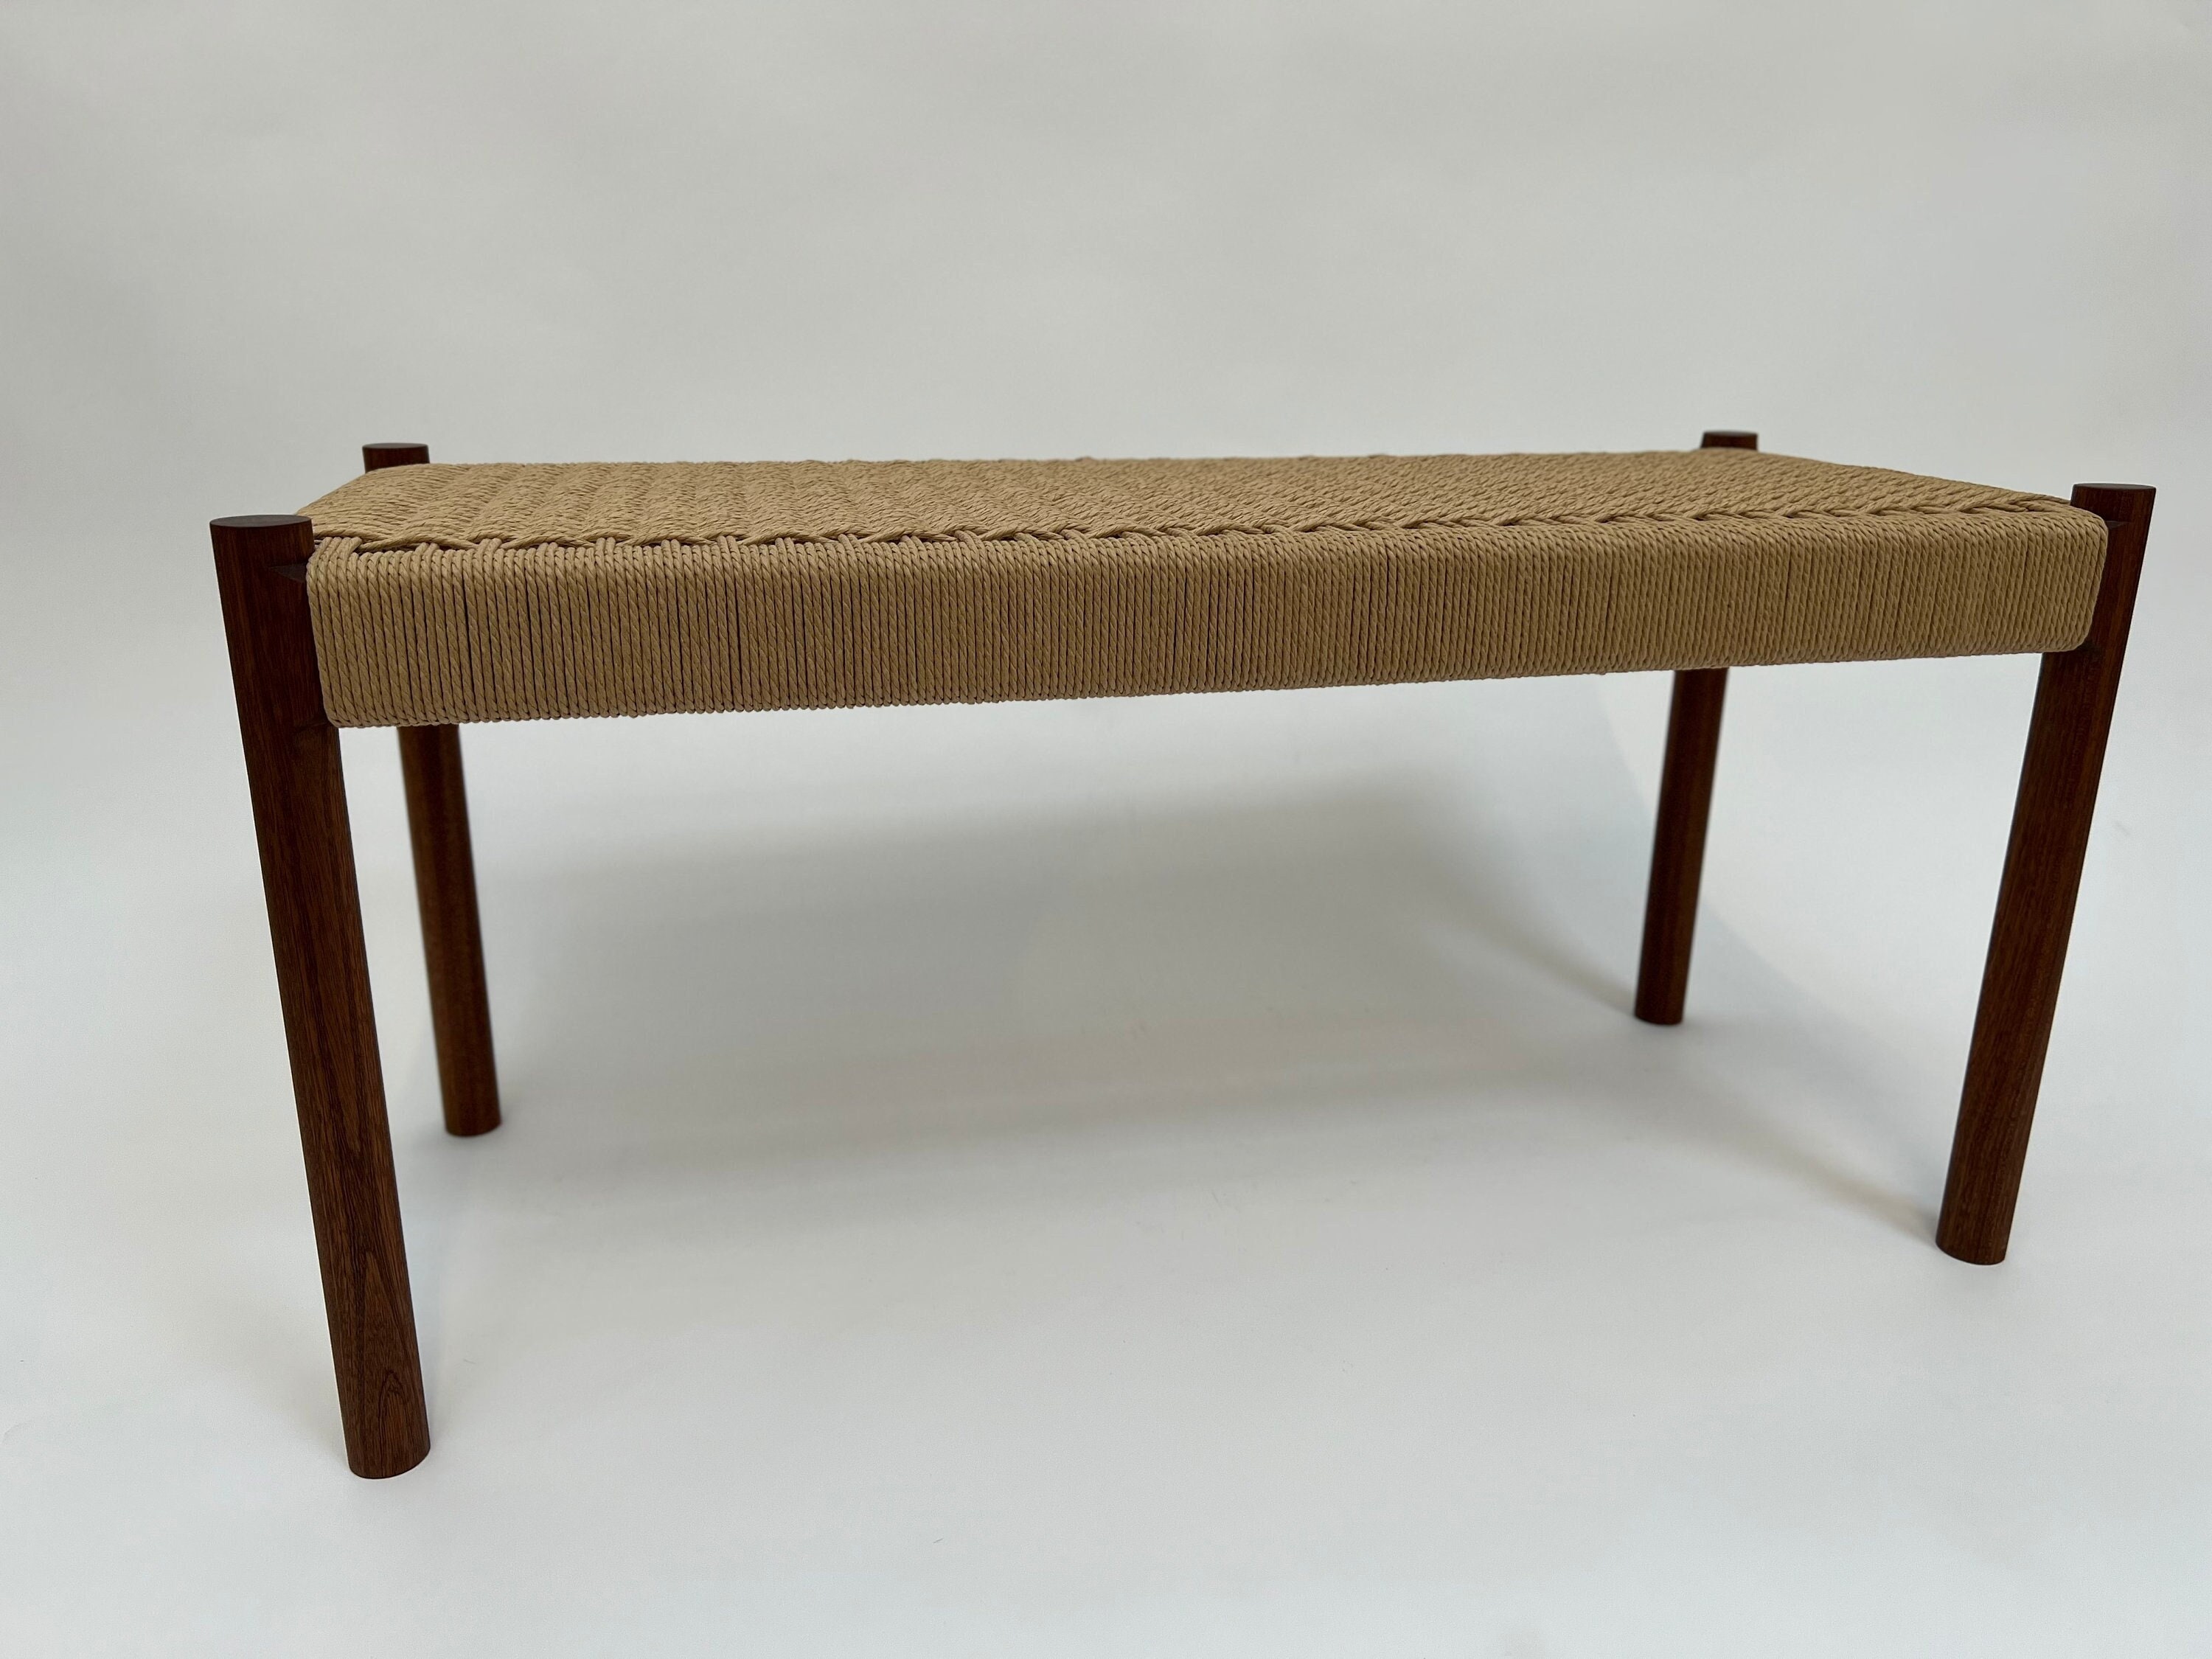 Entryway Bench With Woven Danish Cord Seat 